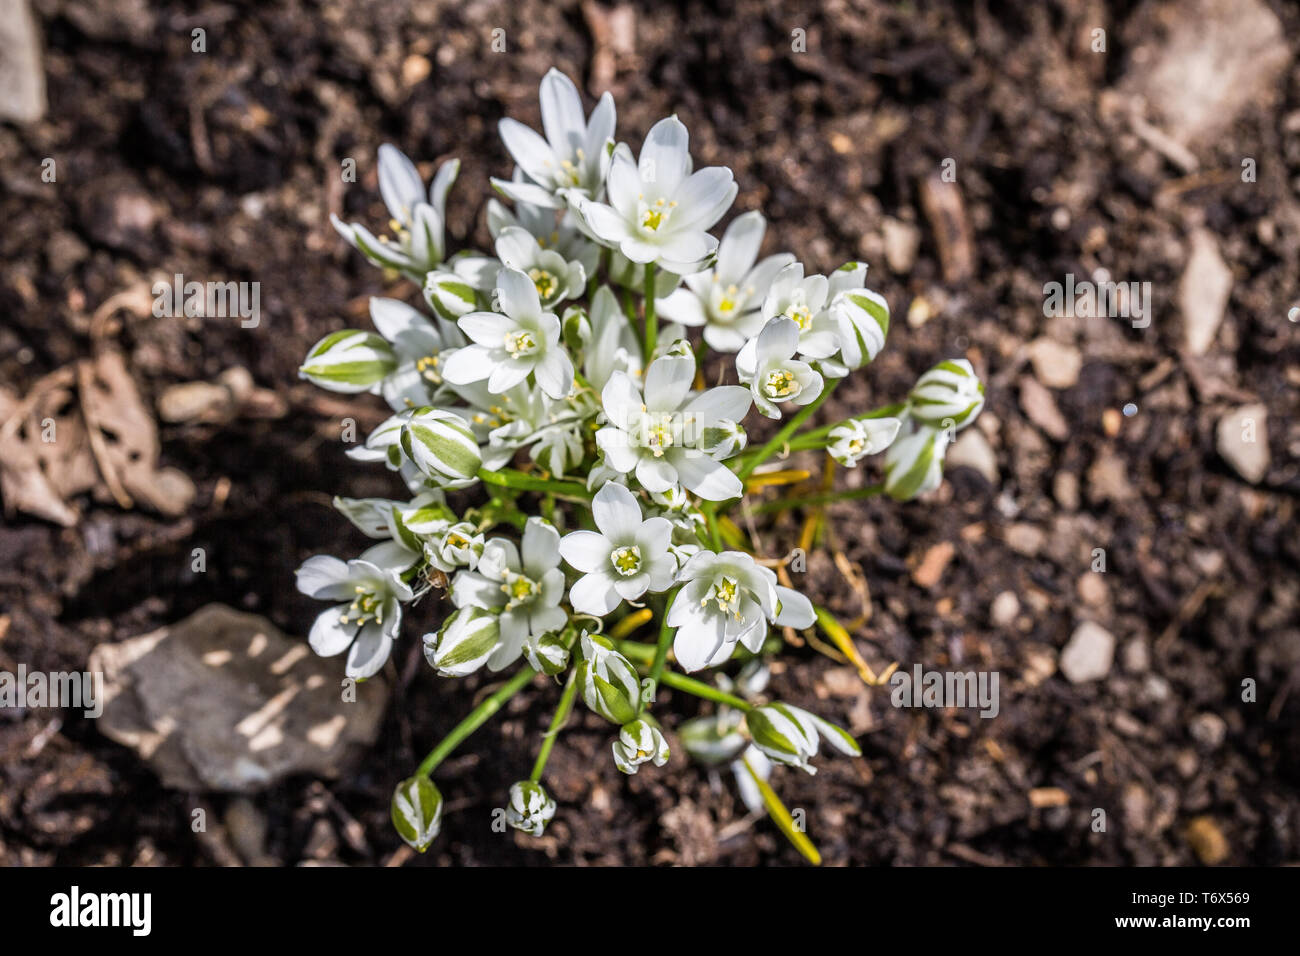 Blooming umbels milk star in the bed Stock Photo